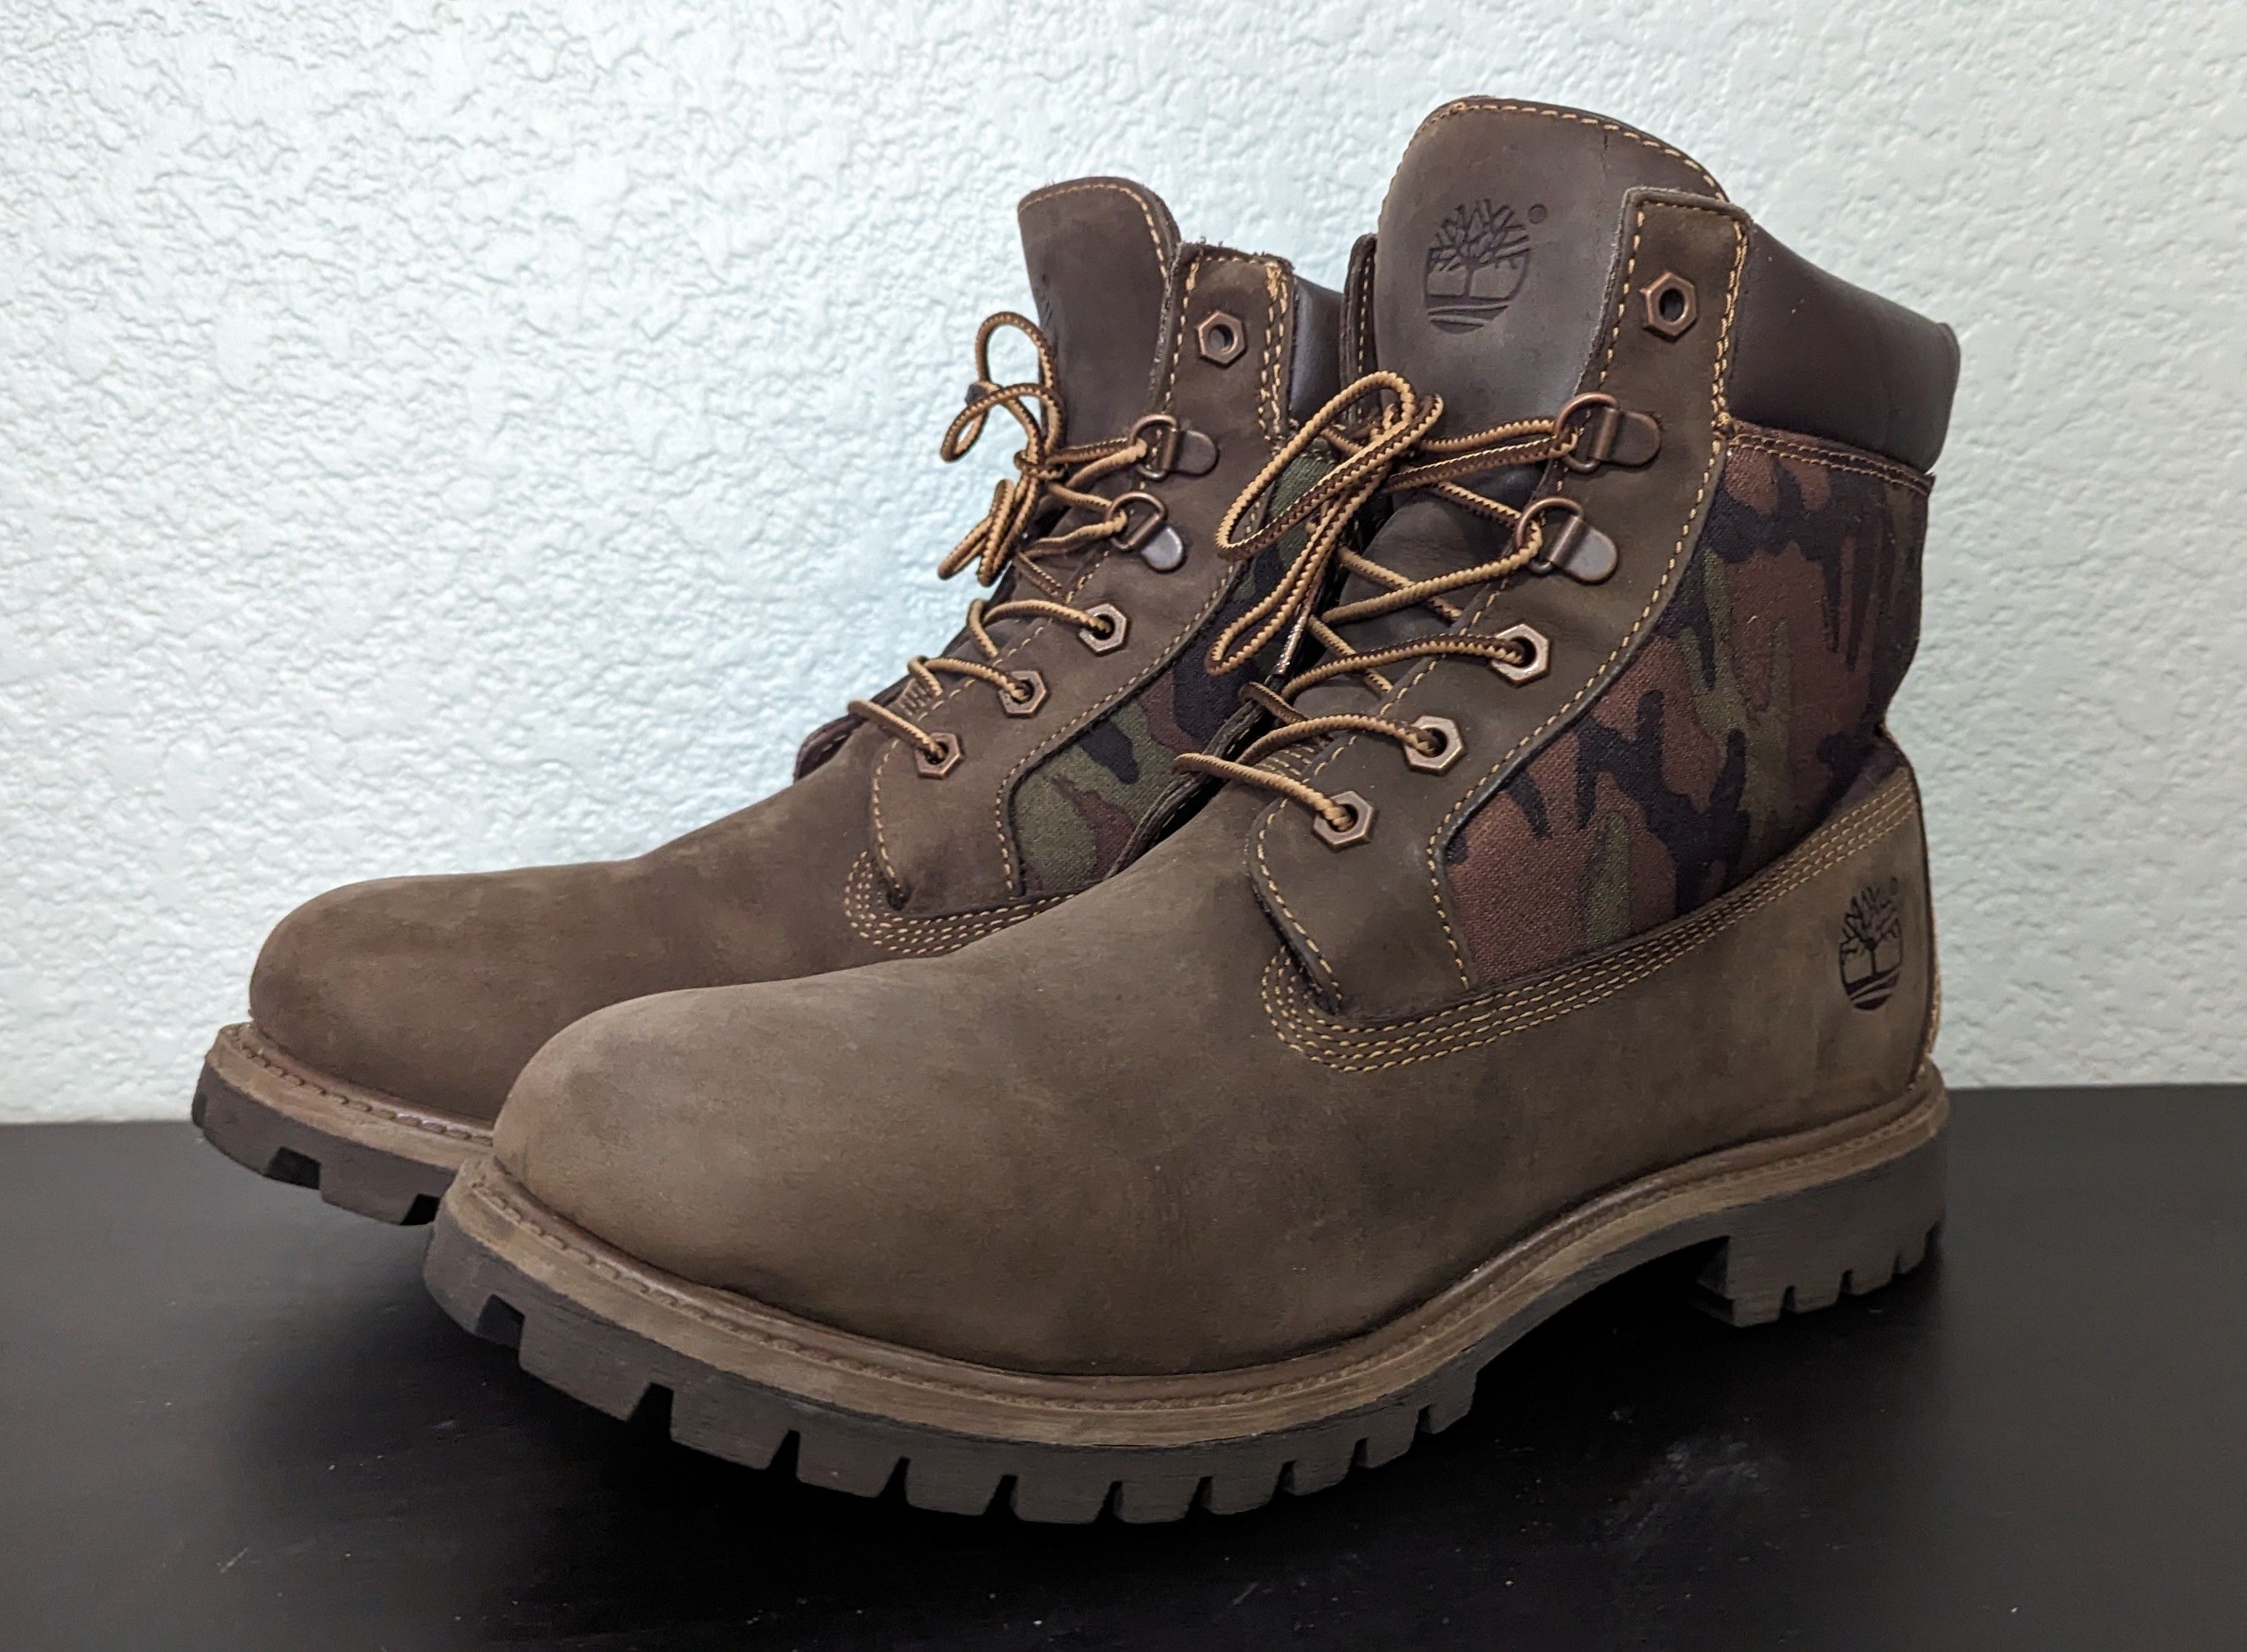 Timberland Timberland 6 inch boot camo Size US 10.5 / EU 43-44 - 1 Preview